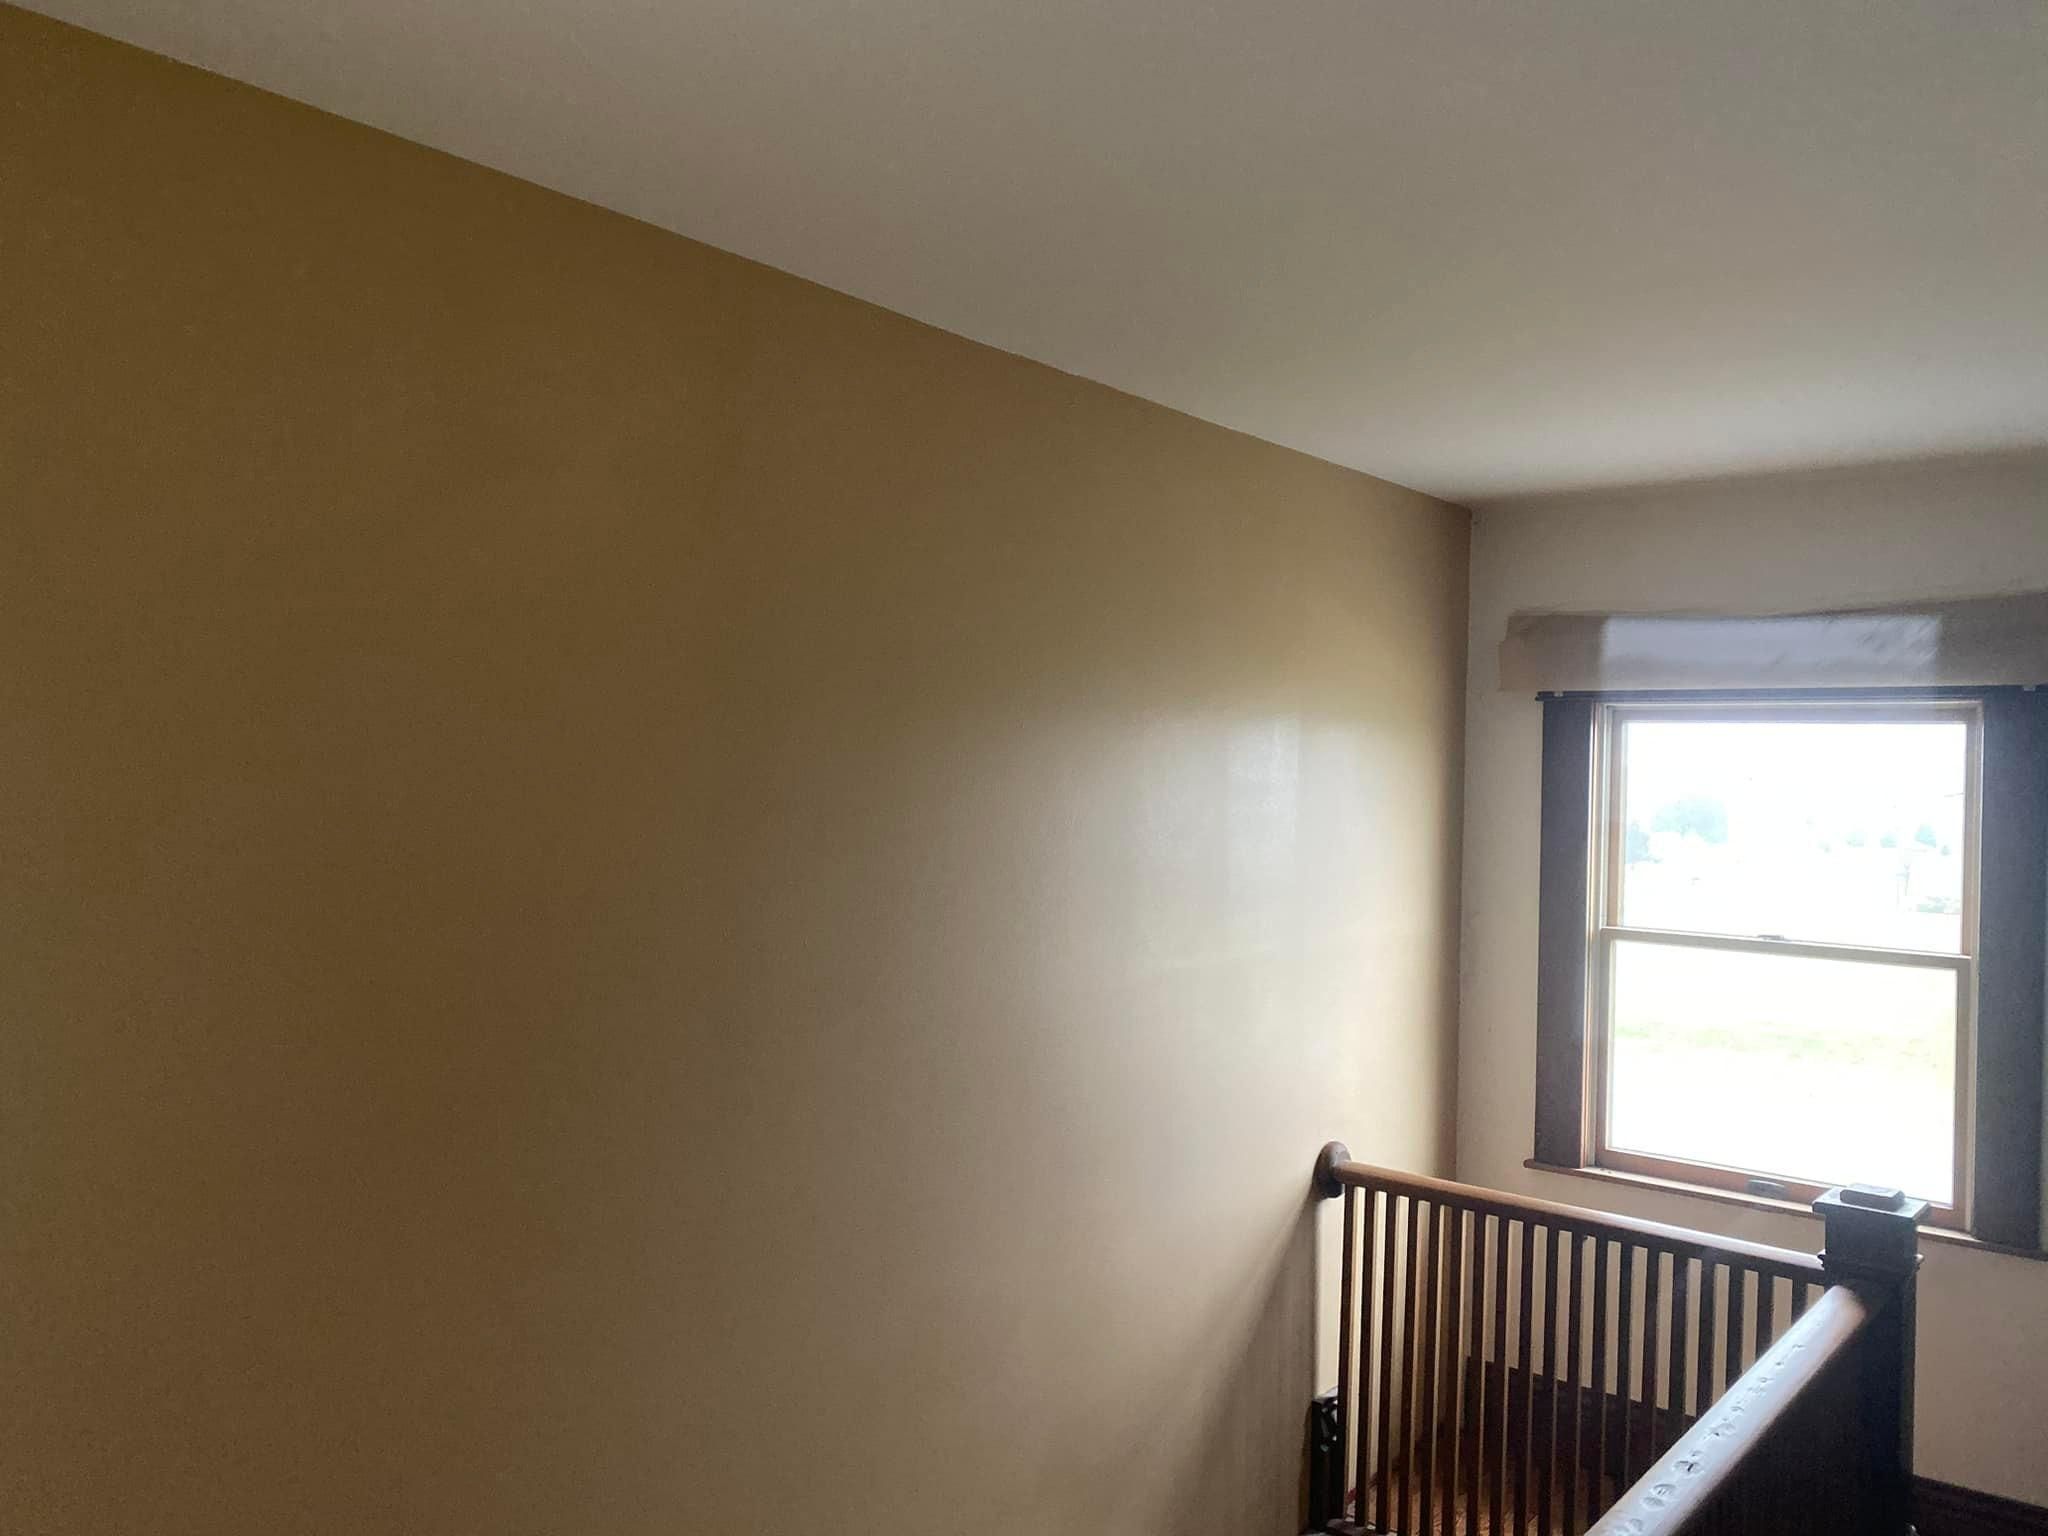  for Facility Service Painting in Munster, Indiana